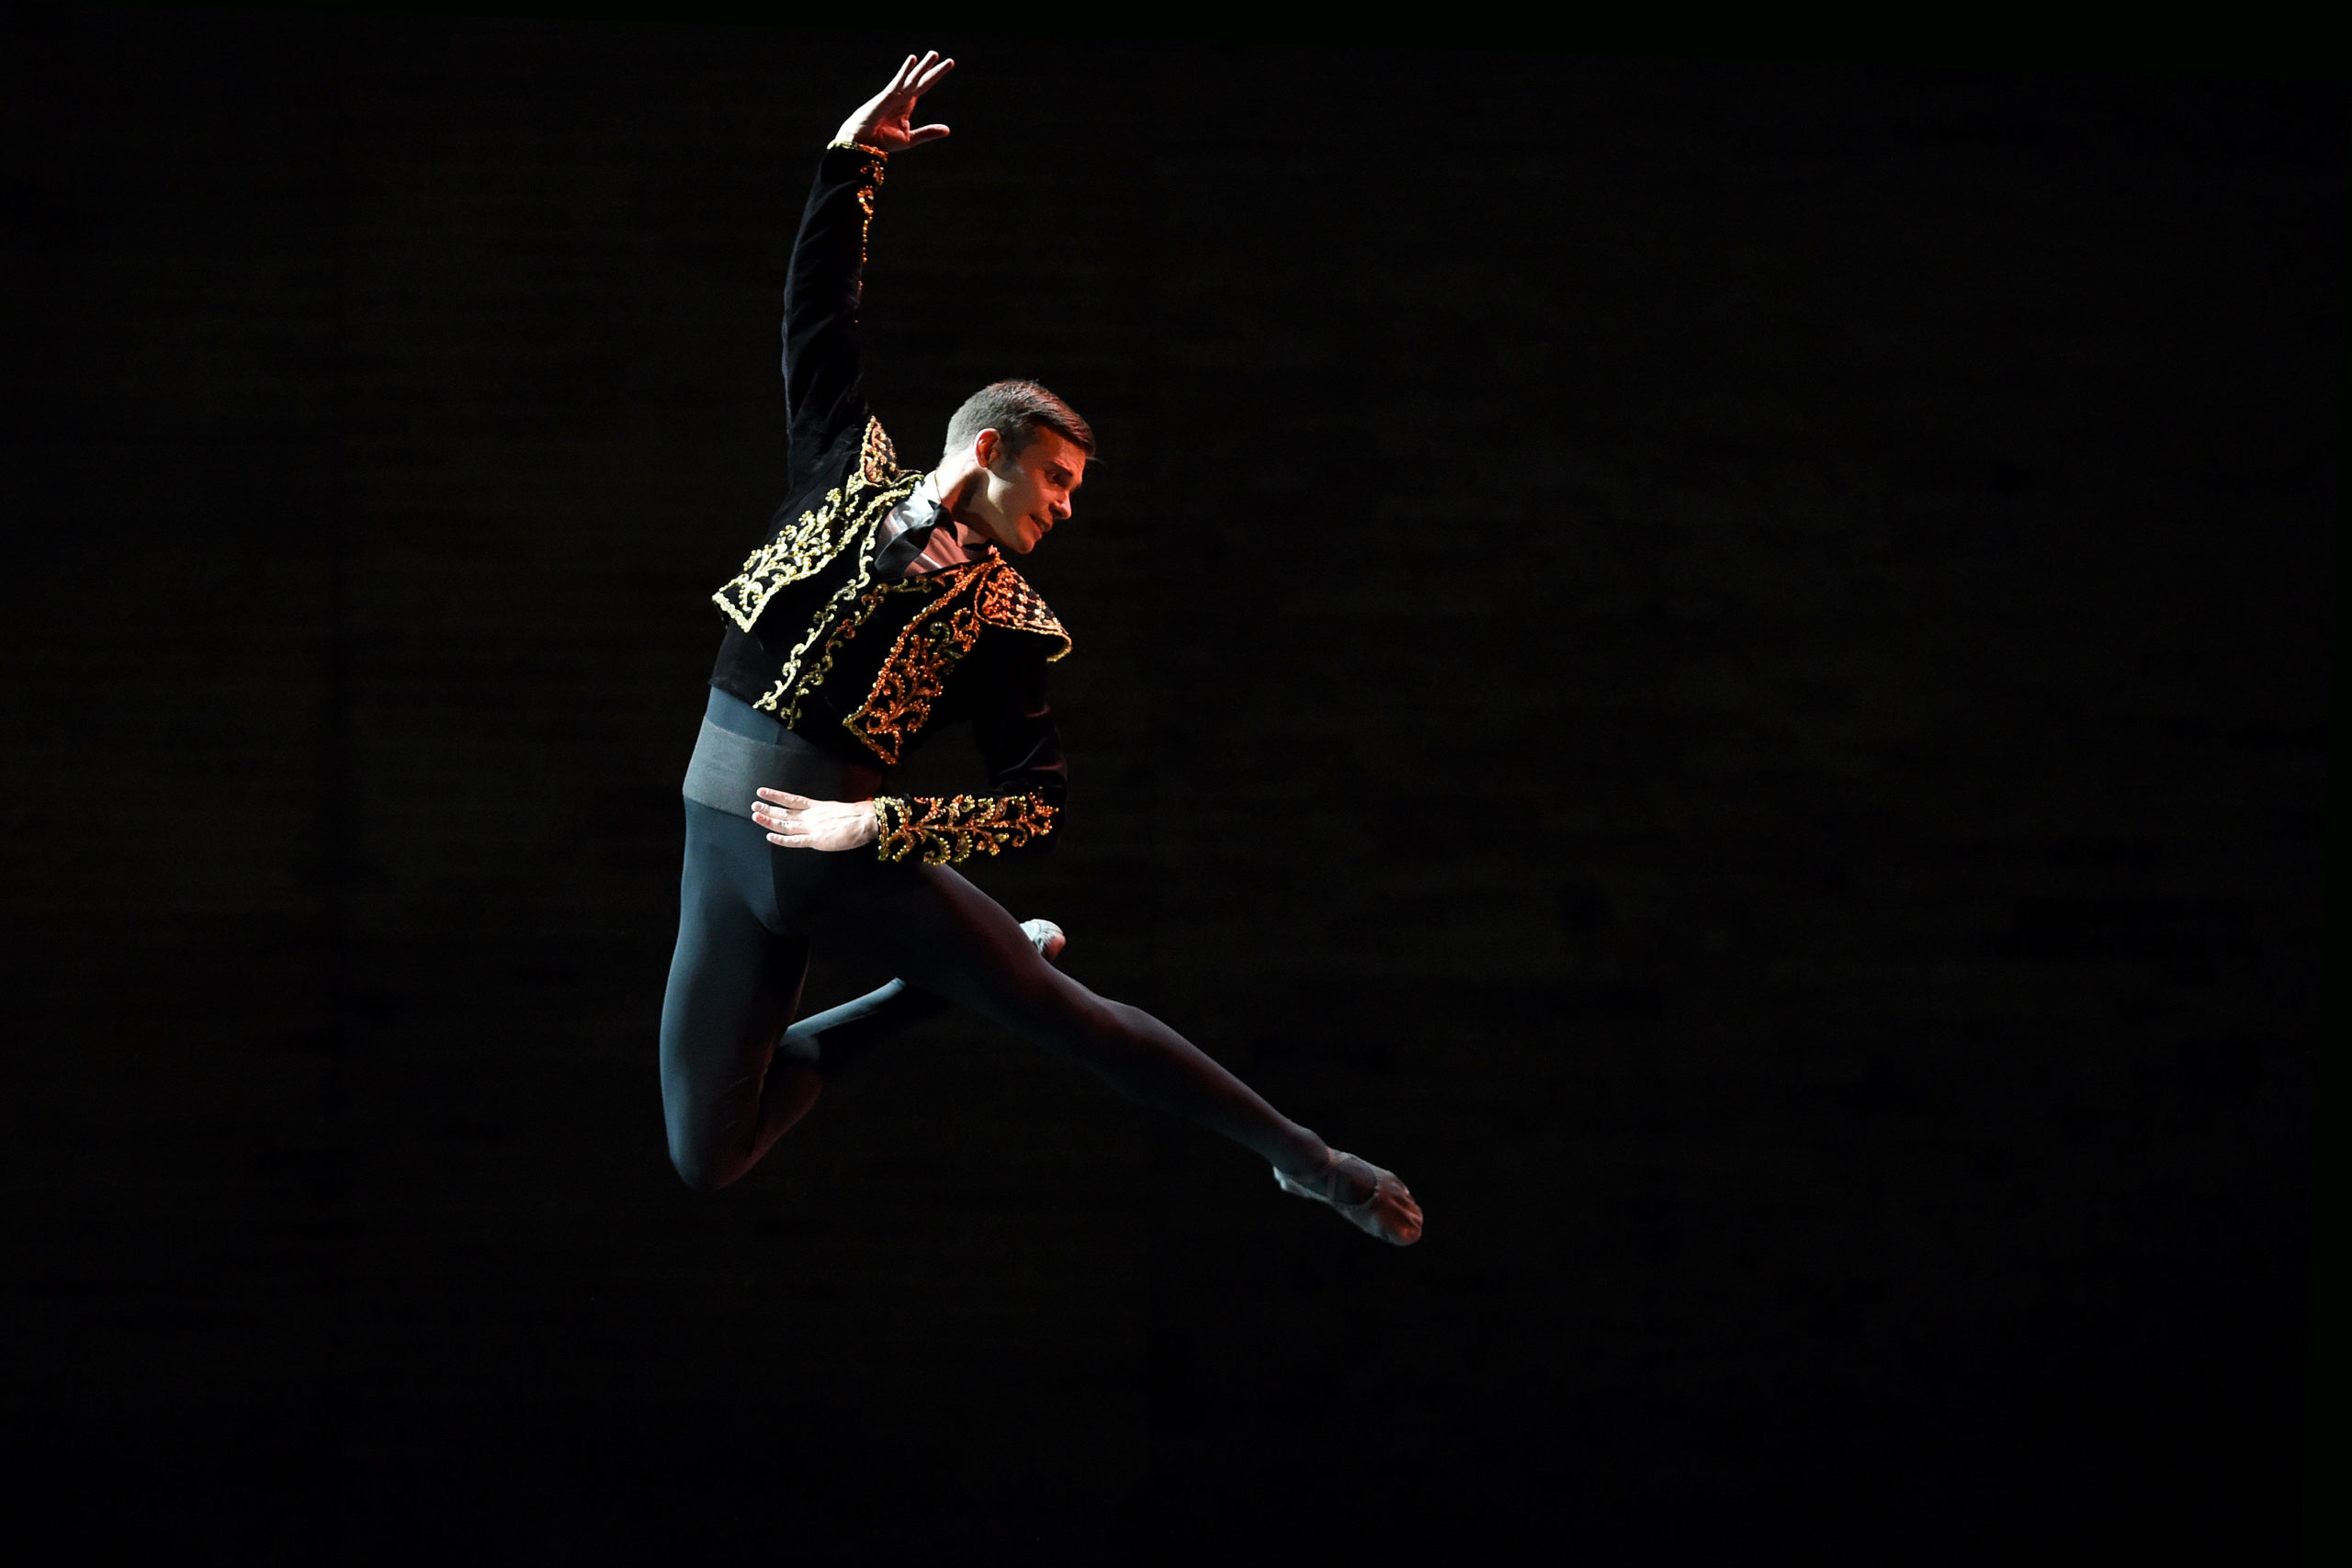 Oleksii Potiomkin, wearing black tights and a black and gold bolero-style jacket, jumps high into the air with his right leg in passé, arching his body over the the left. He holds his right arm up above his head and holds his waist with his left hand.